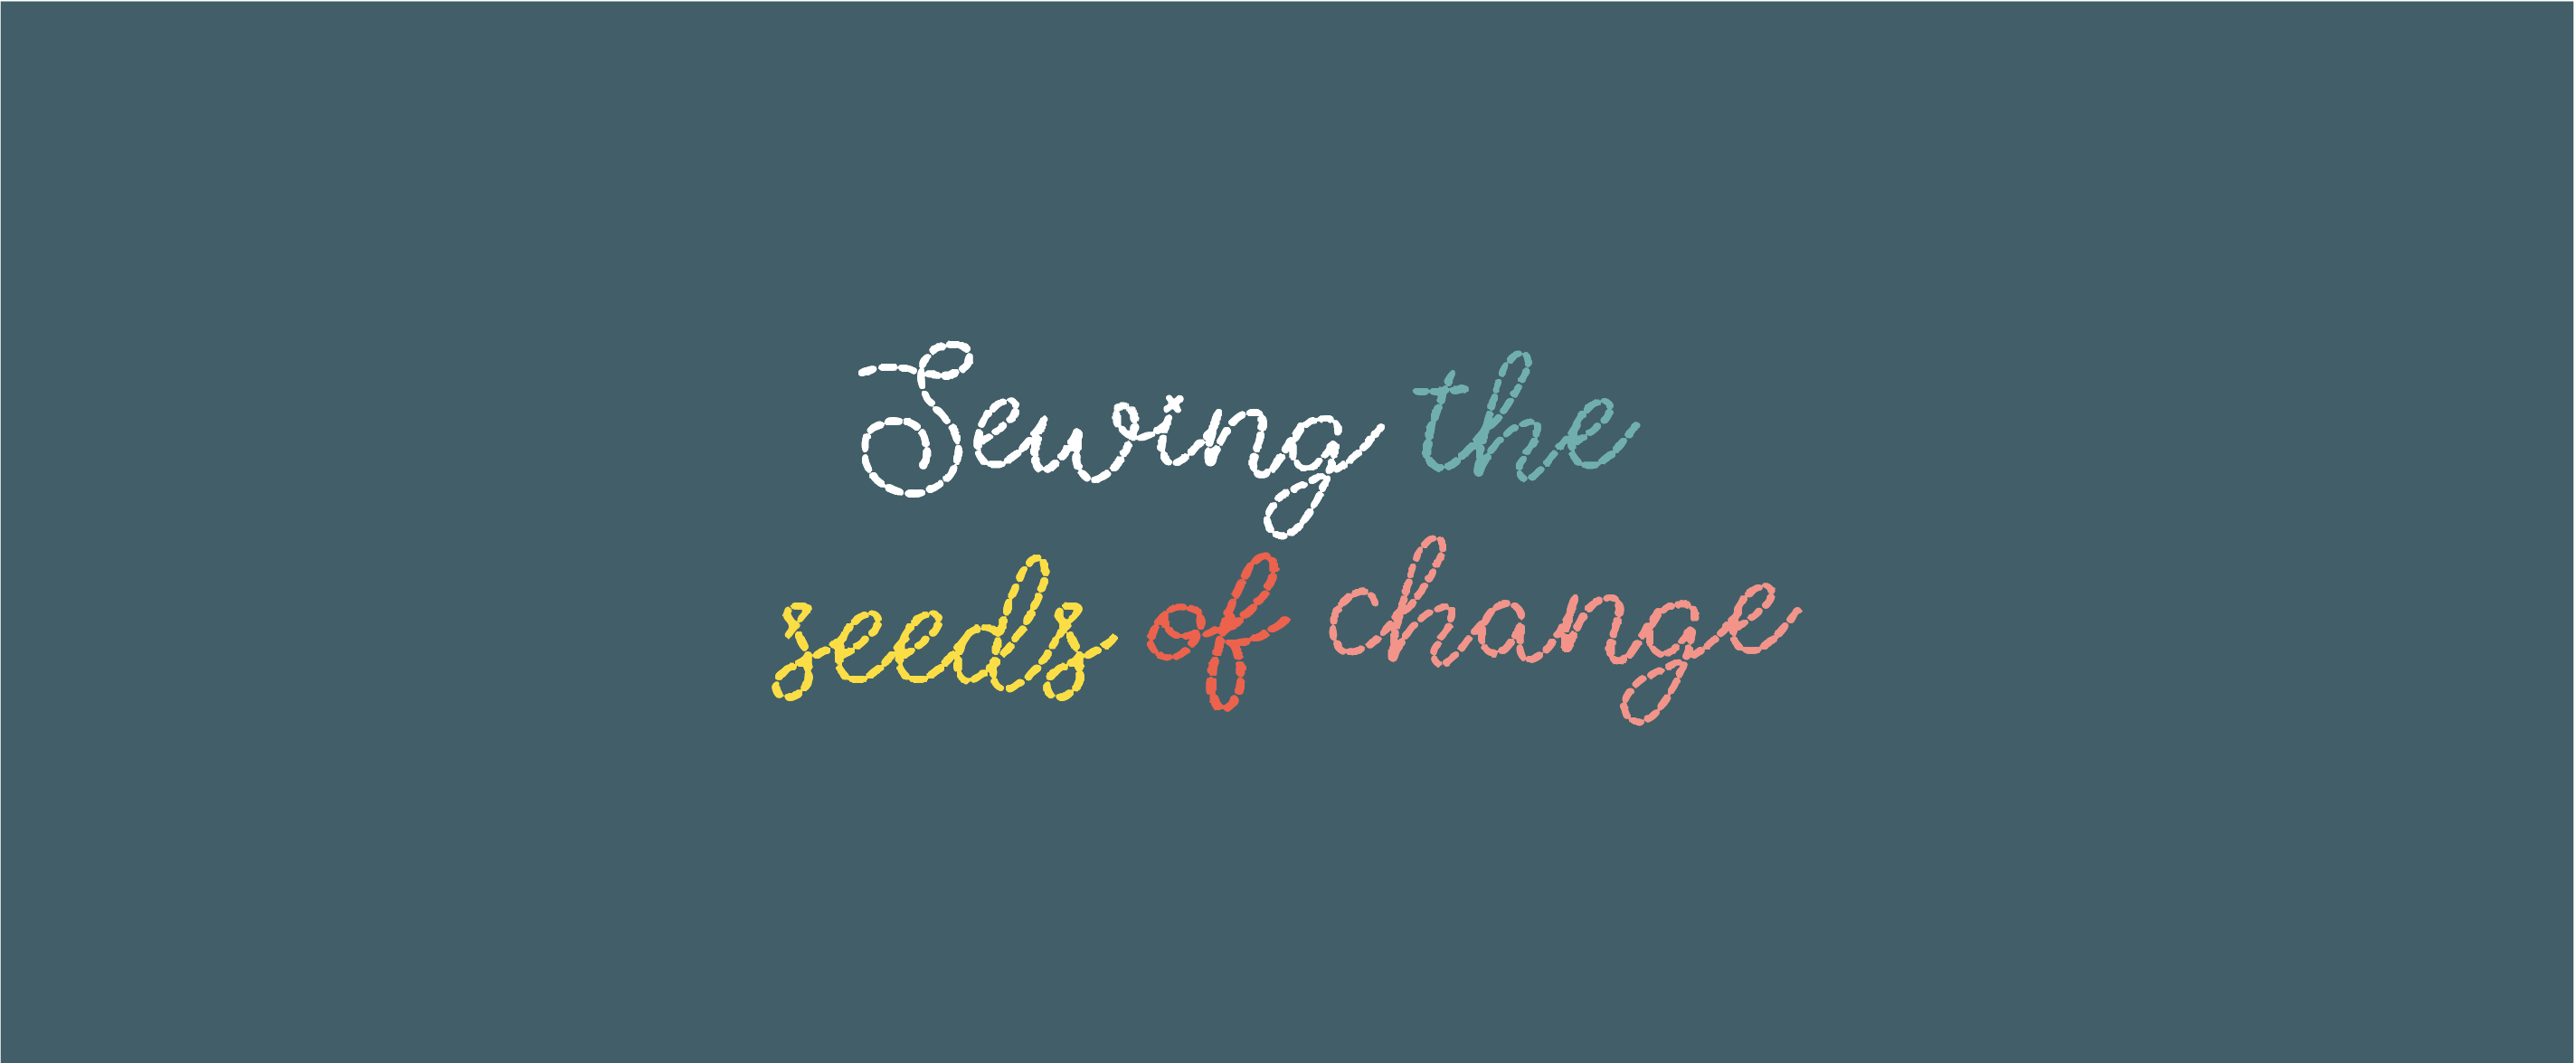 sewing the seeds of change typographical illustration ILO Clothing